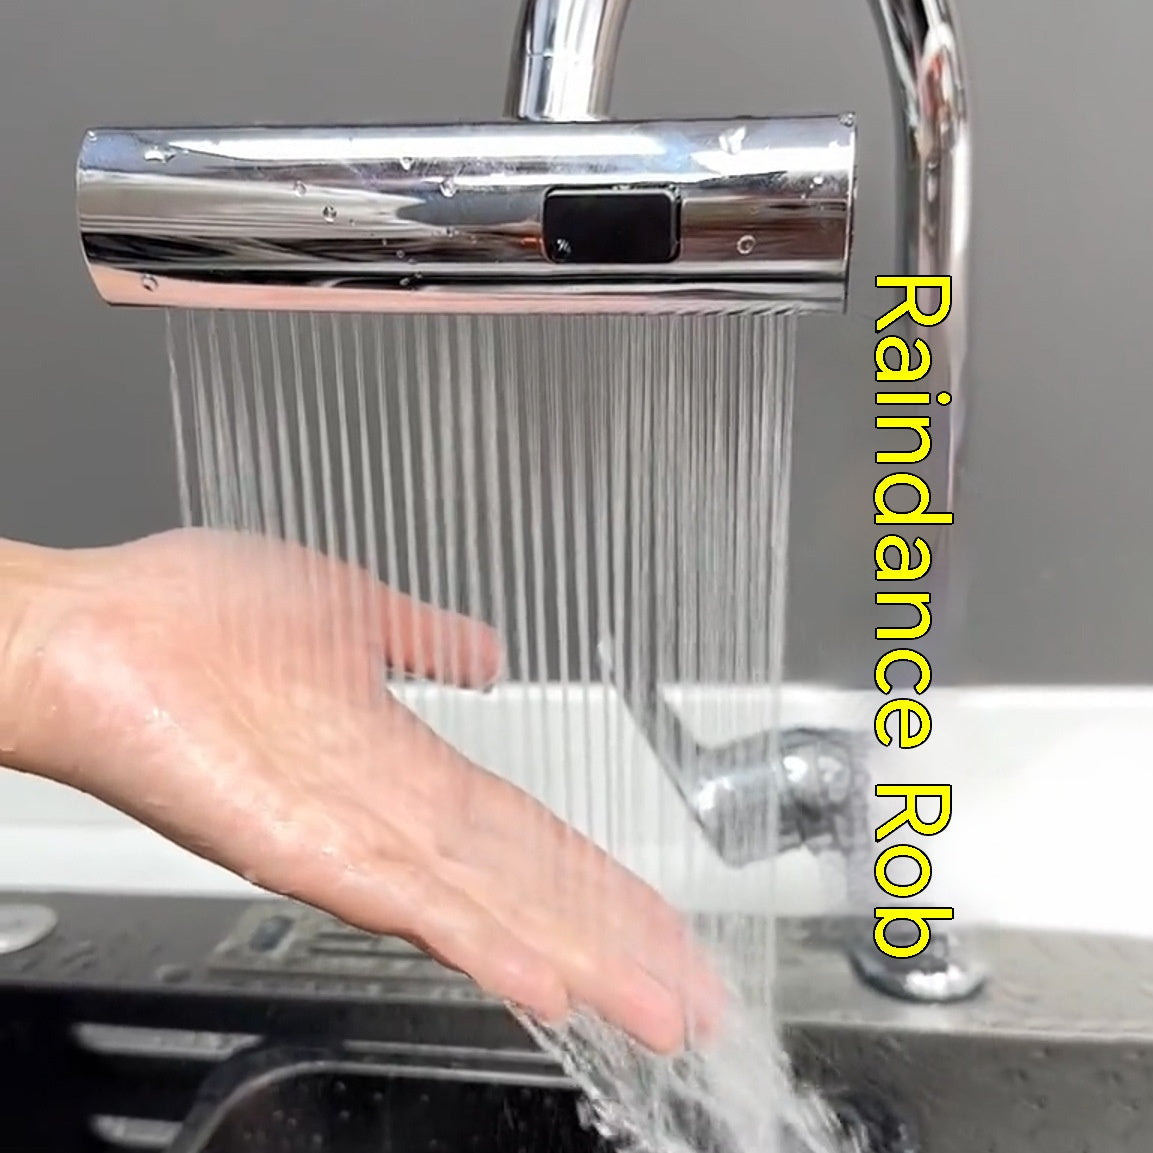 Waterfall  Faucet Connector 3-in-1